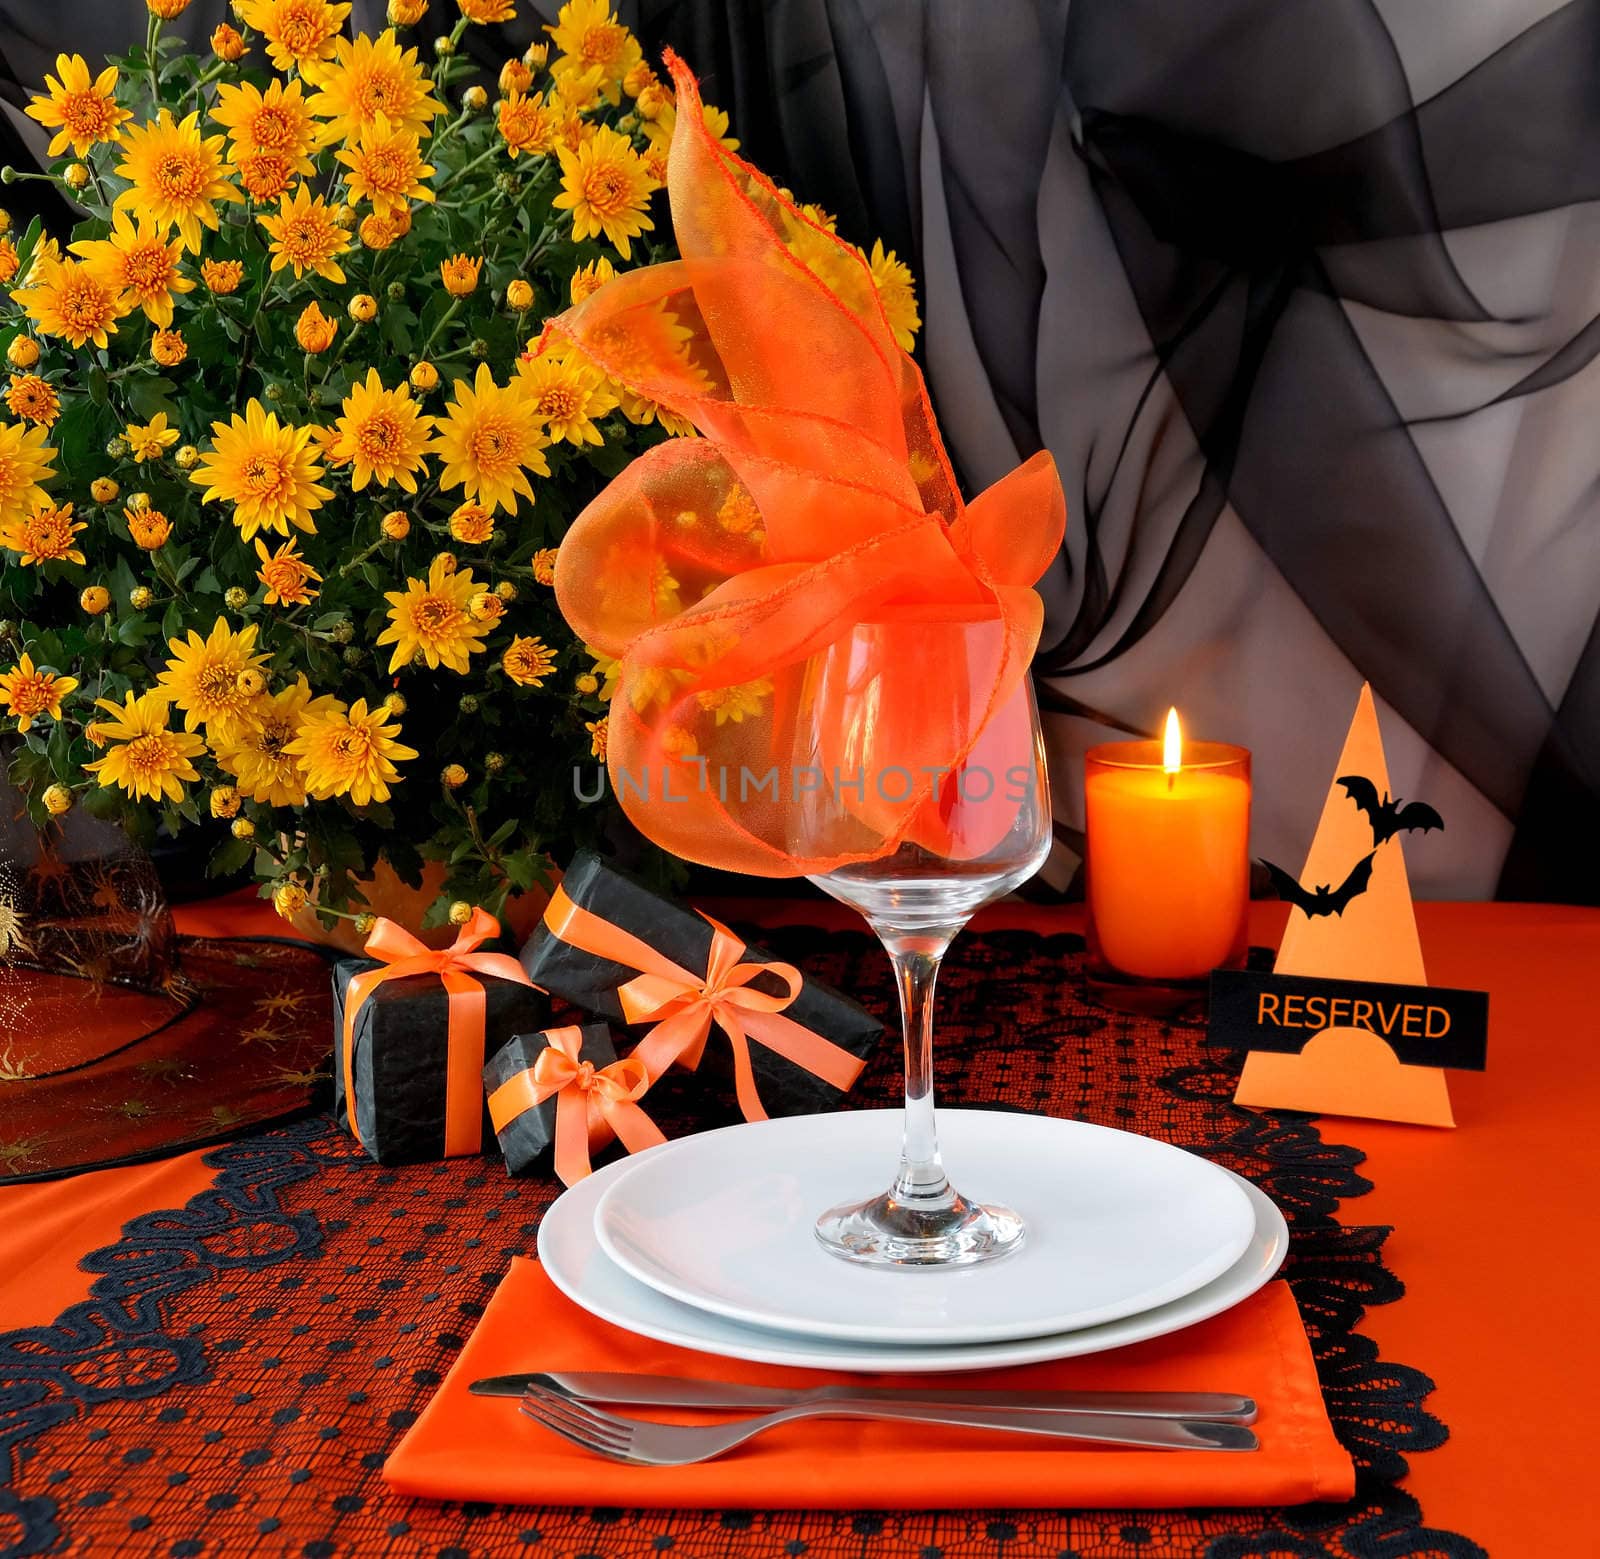 Festive table design in the style of Halloween gifts